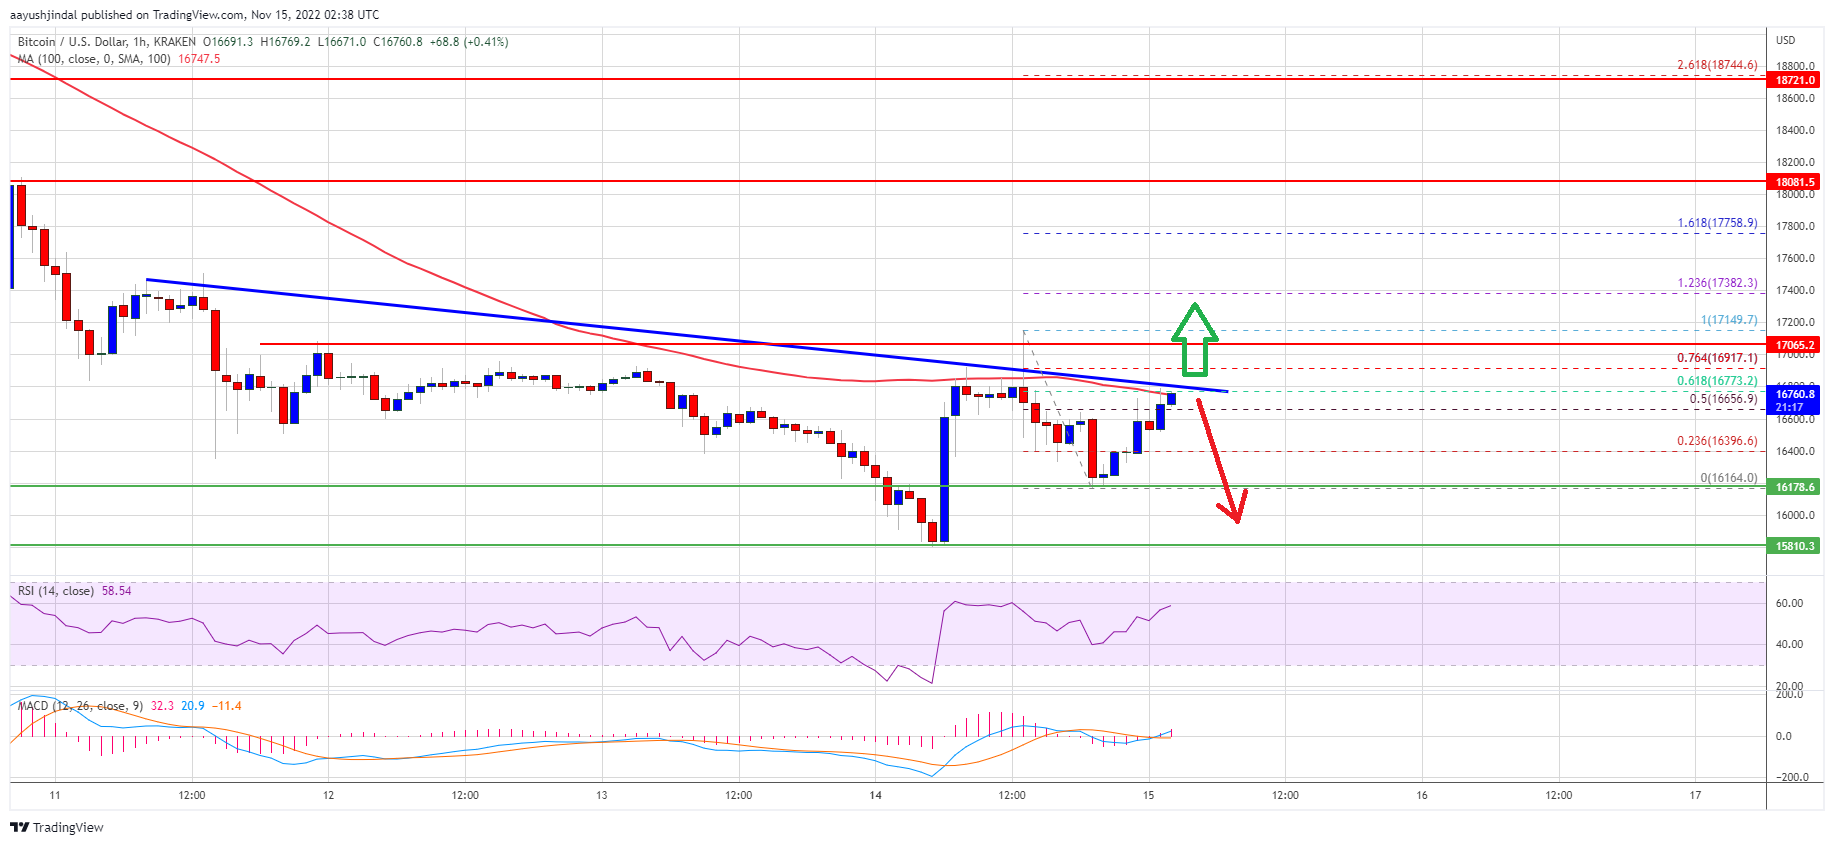 Bitcoin Price Consolidates, Why 100 SMA Could Start A Decent Recovery